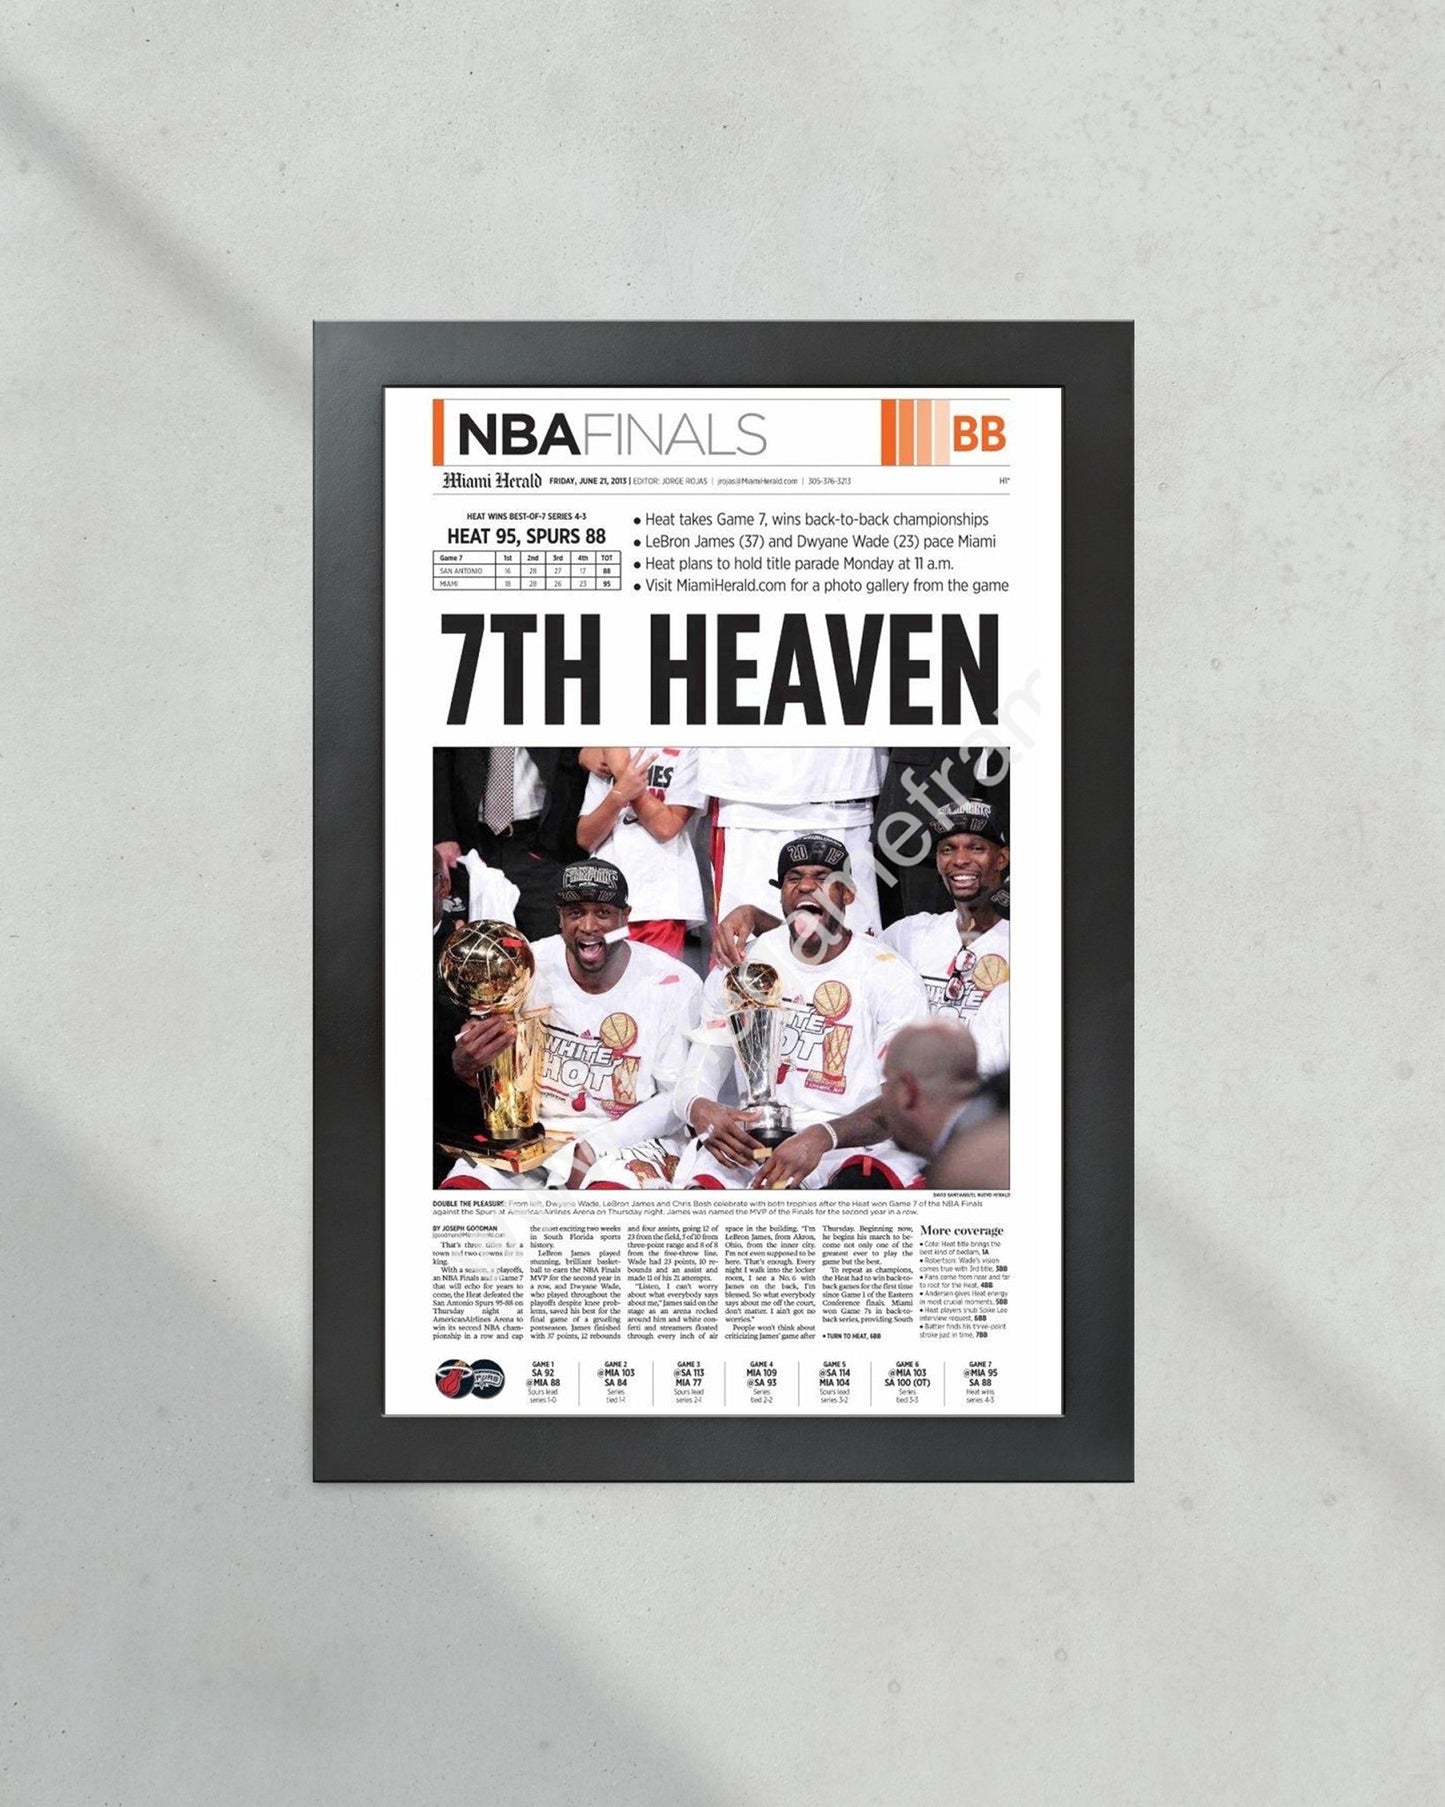 2013 Miami Heat “7th Heaven” NBA Champions Framed Newspaper Front Page Print - Title Game Frames